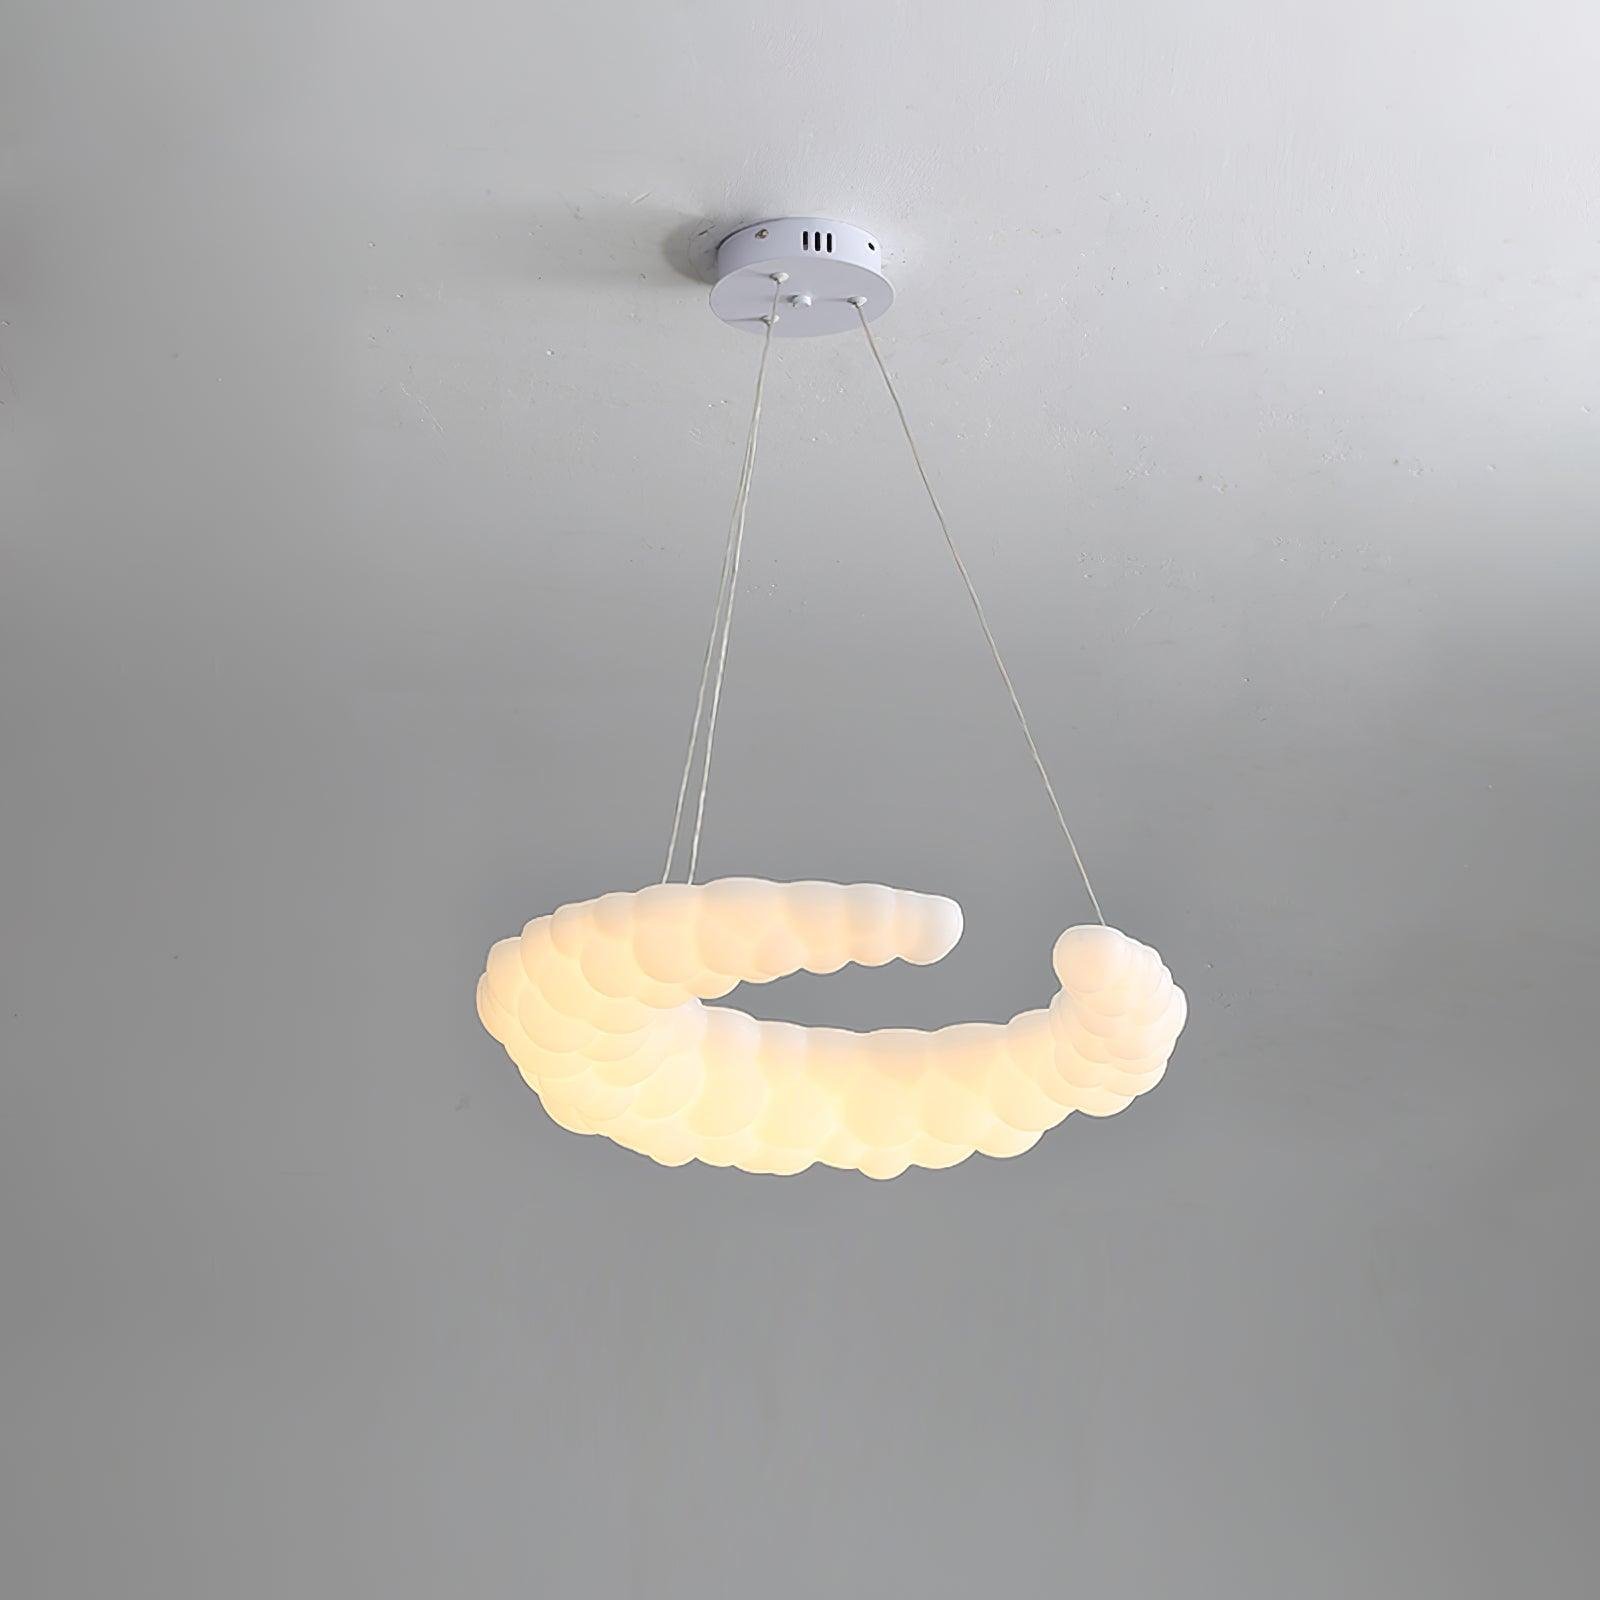 Avir Chandelier with Three-Color Changing Light in White, Diameter 27.5 inches x Height 5.9 inches (70cm x 15cm)